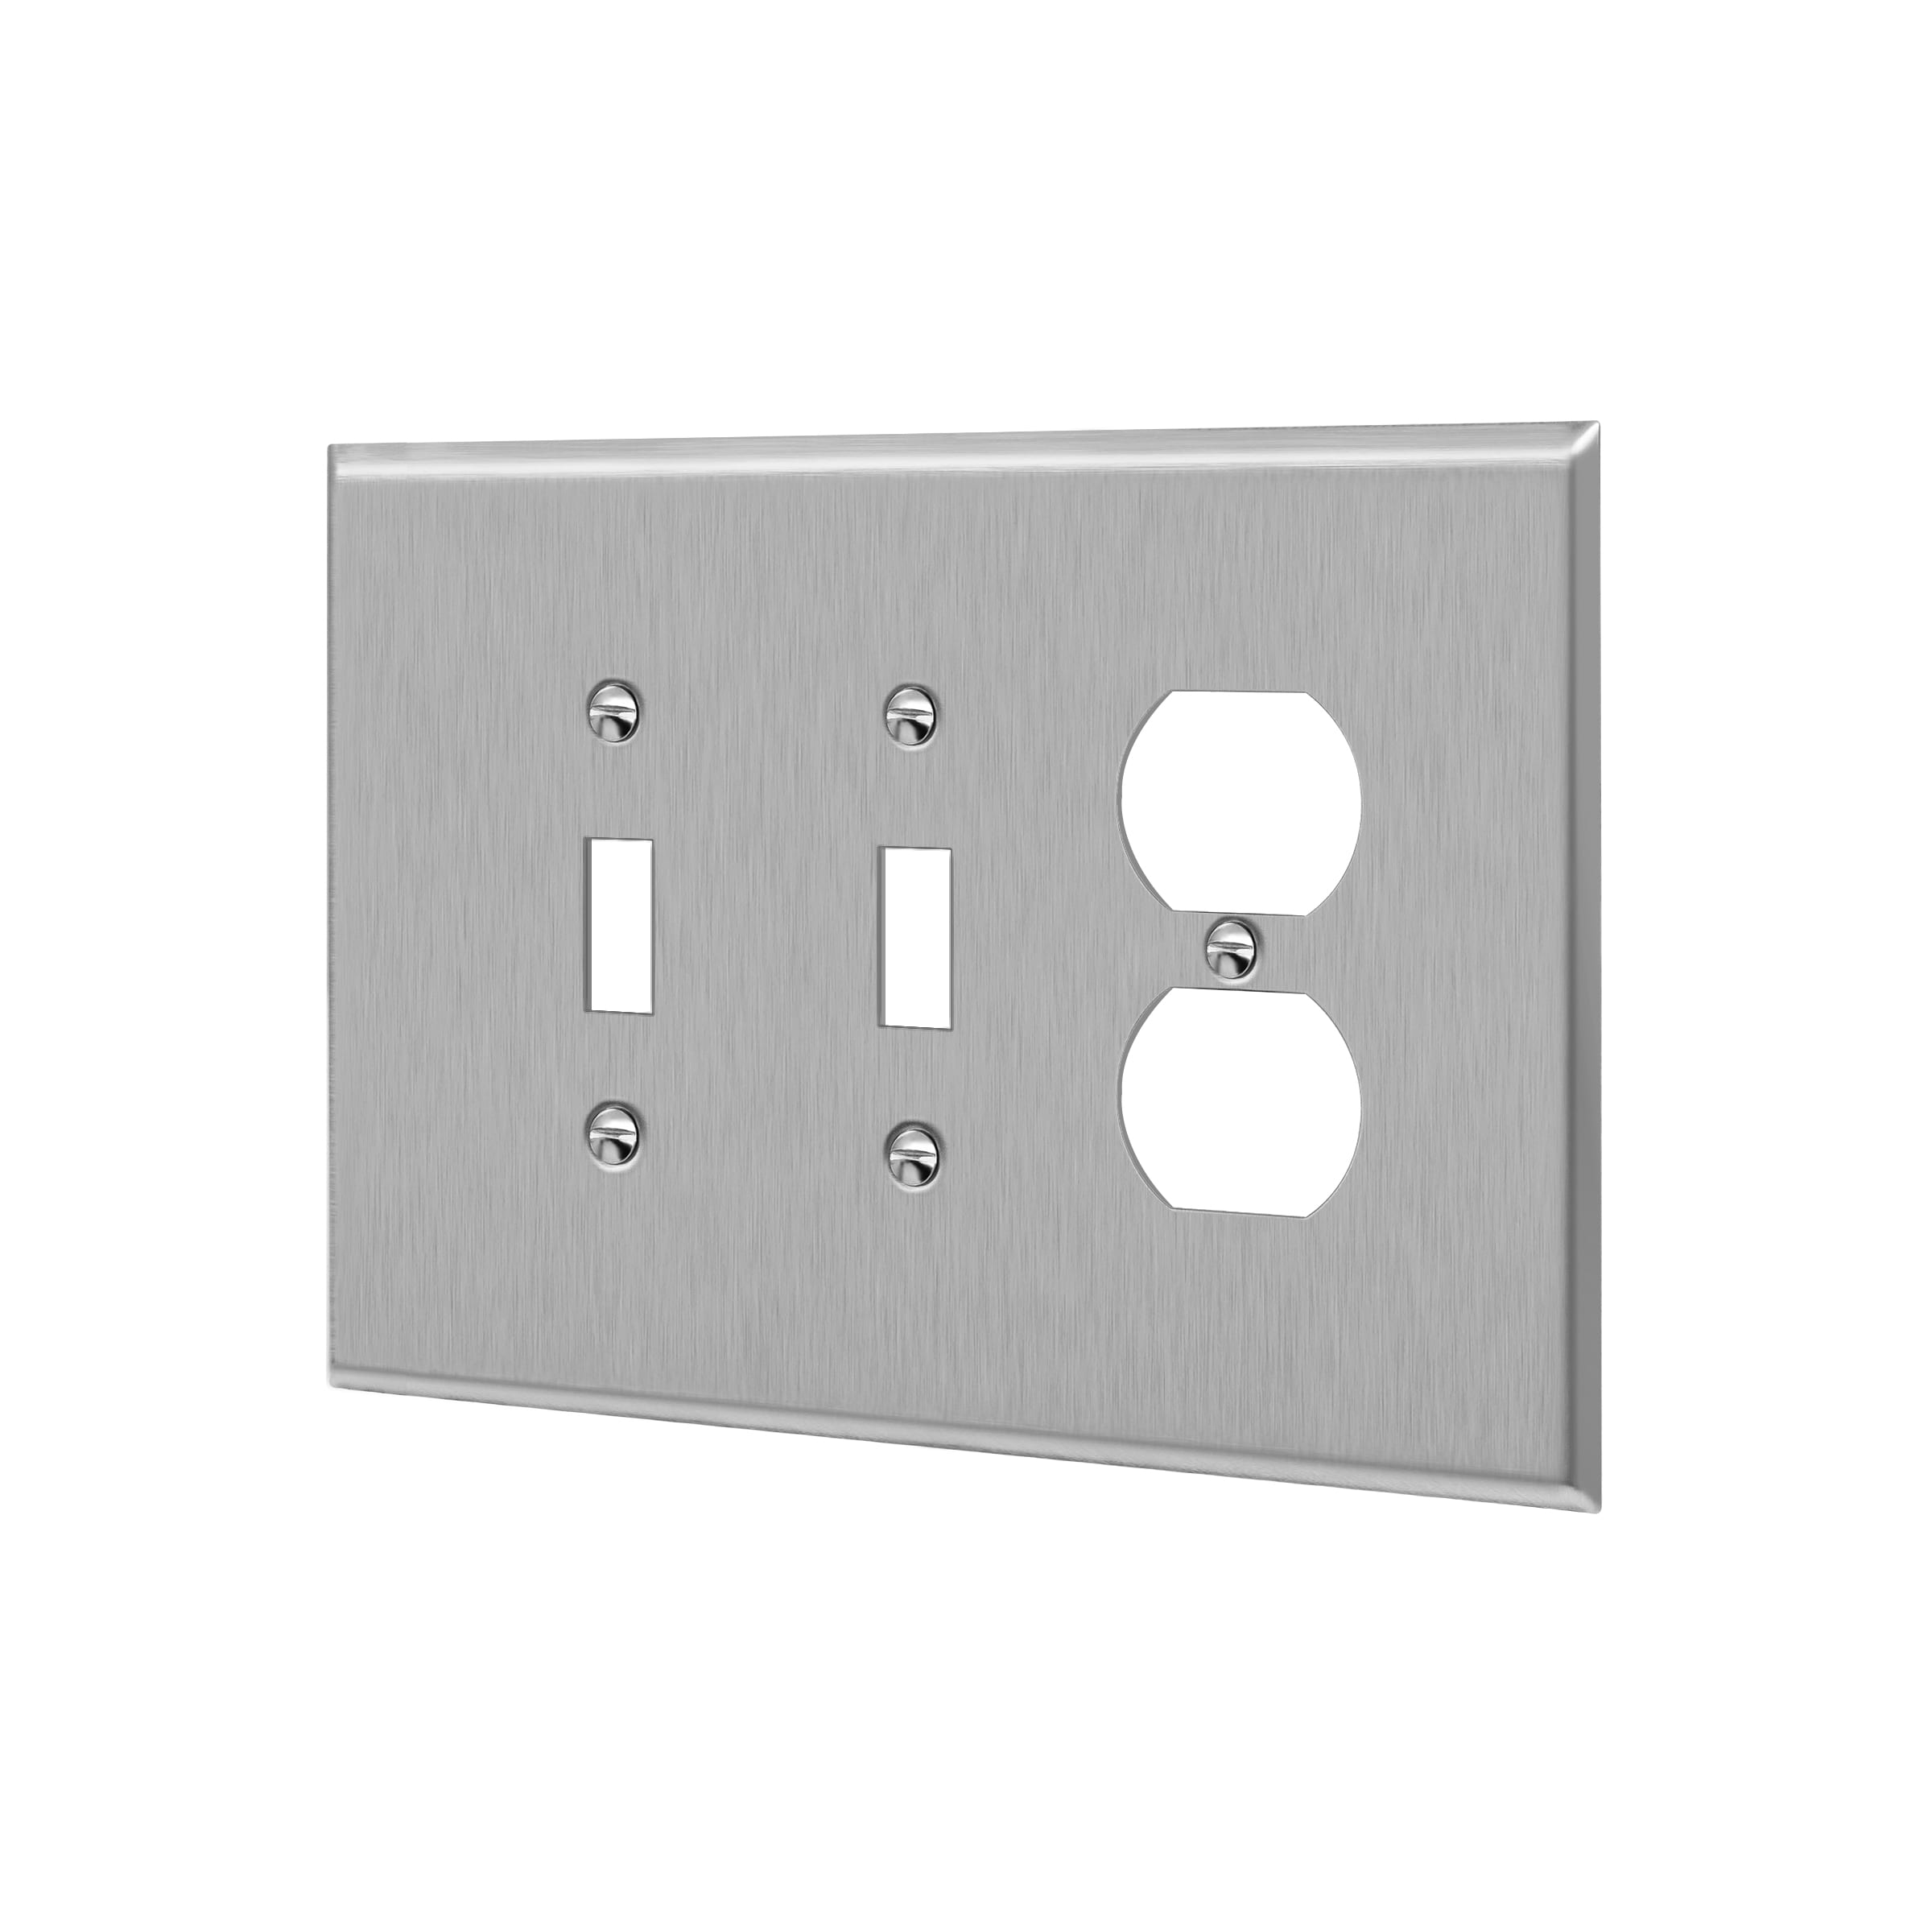 Combination Two Toggle-One Duplex Receptacle Metal Wall Plate 430 Stainless Steel